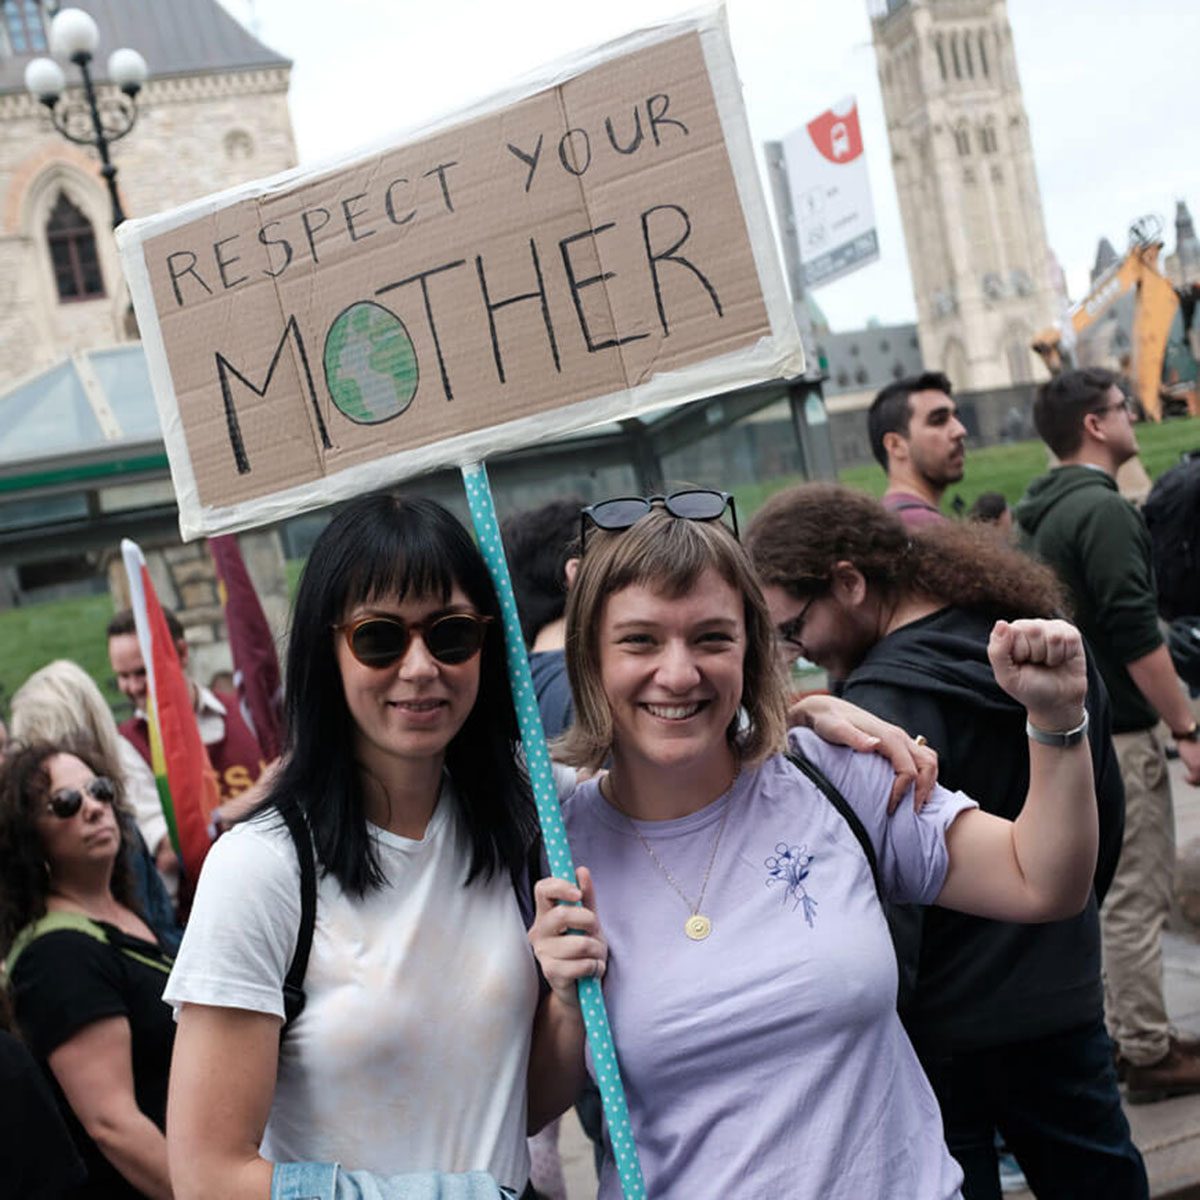 Two women holding a sign: "Respect Your Mother". The O is a circular map of the earth.